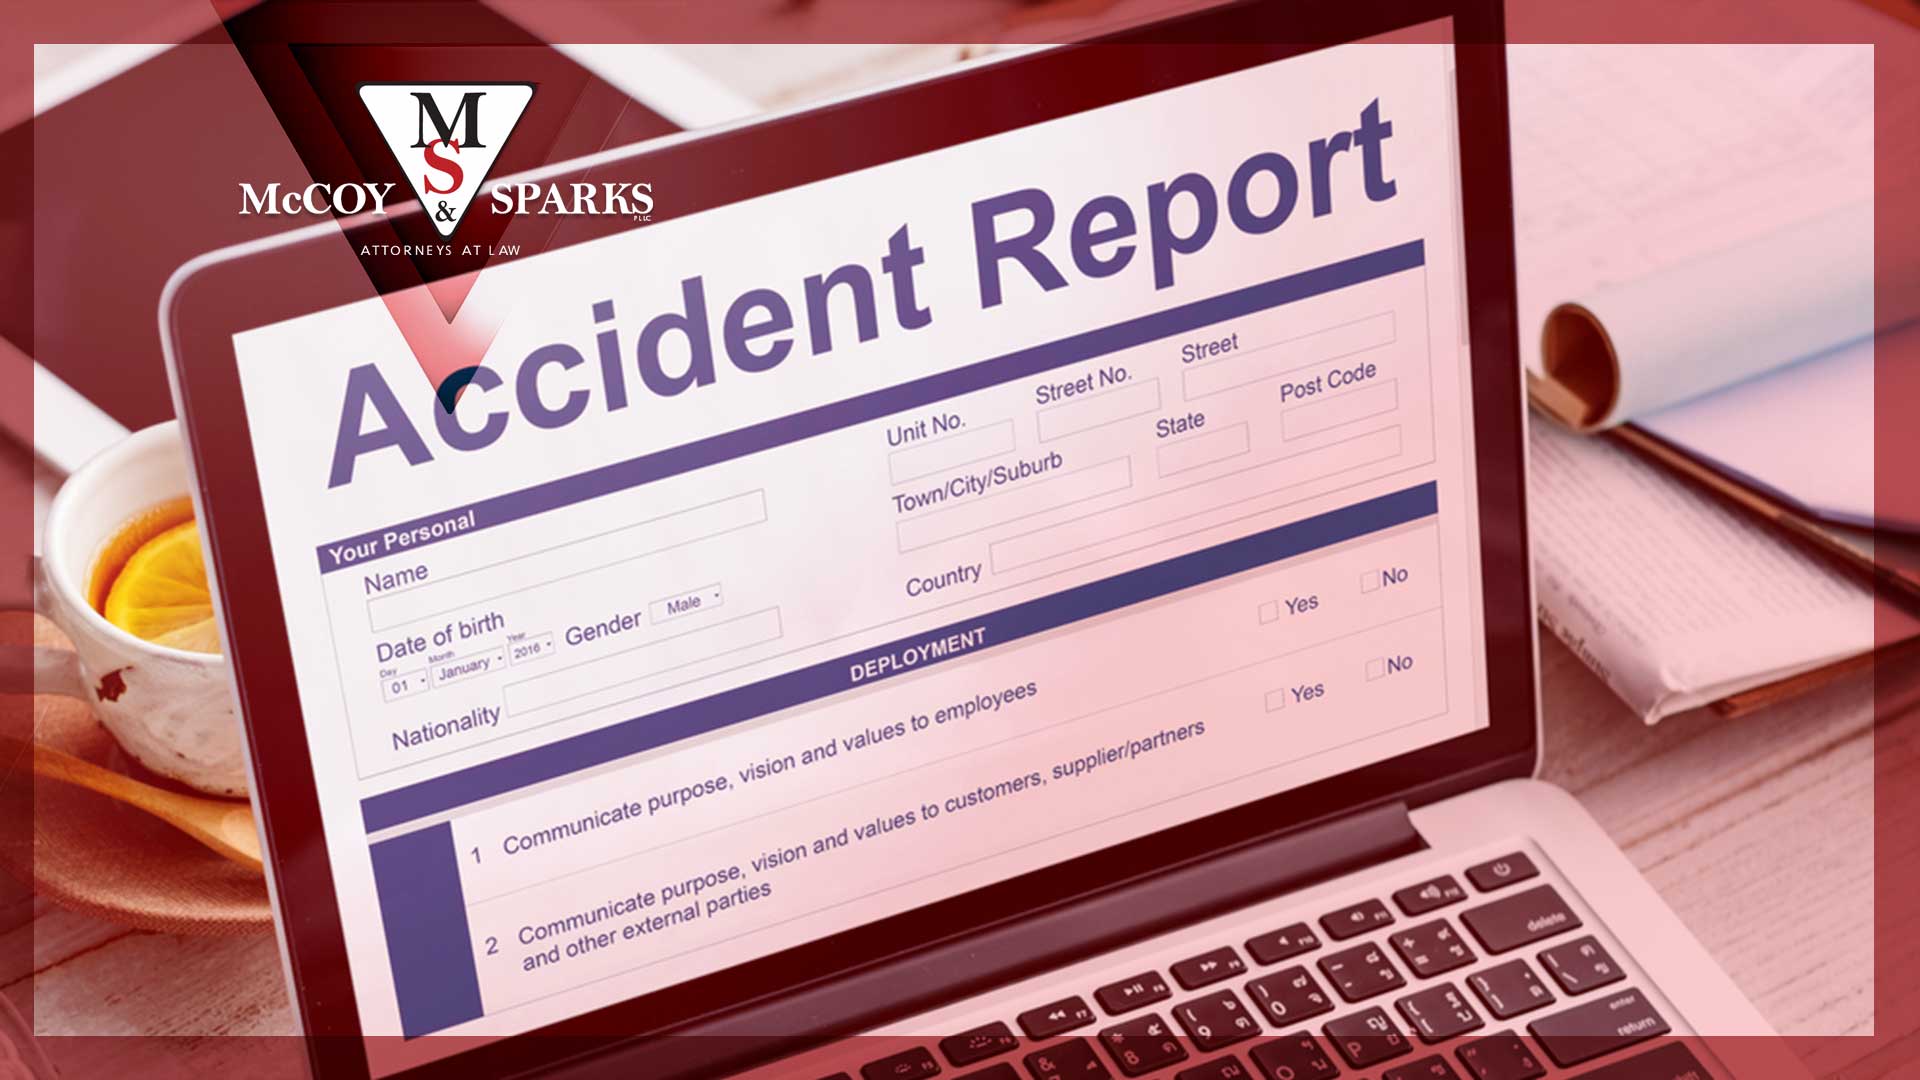 How to File Accident Report Online in Kentucky